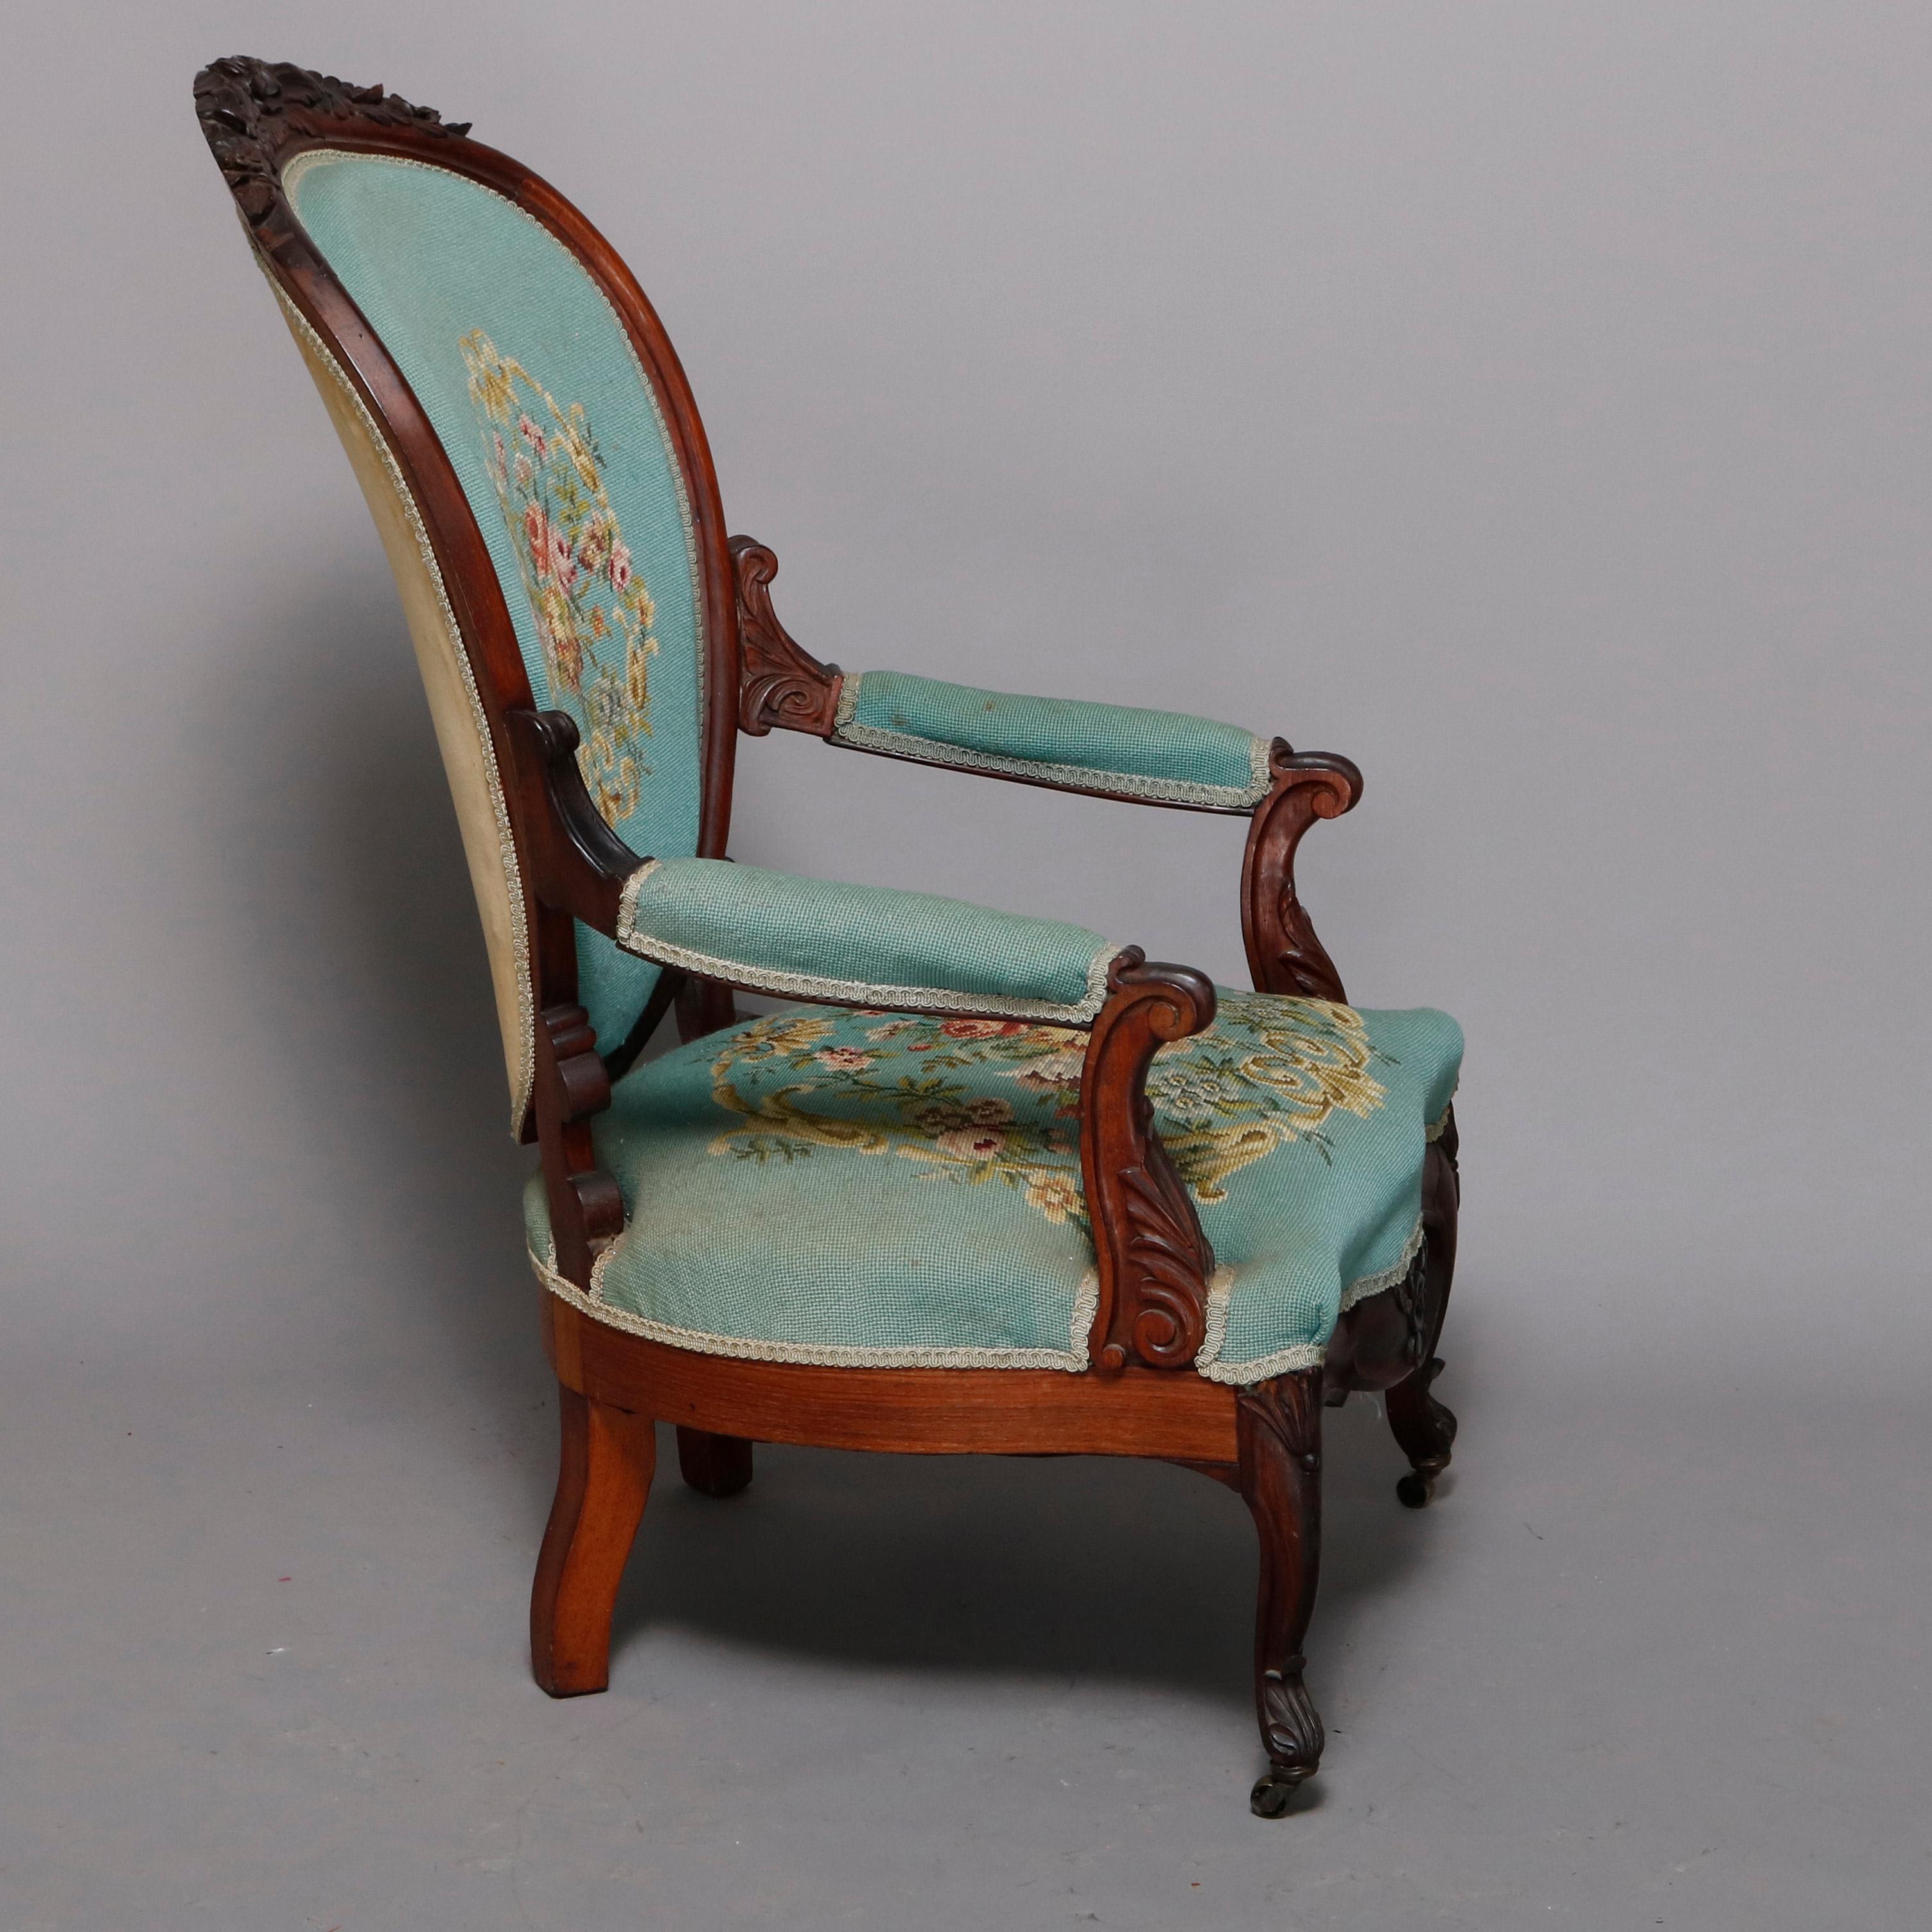 American Antique Victorian Carved Walnut and Needlepoint Parlor Armchair, circa 1880